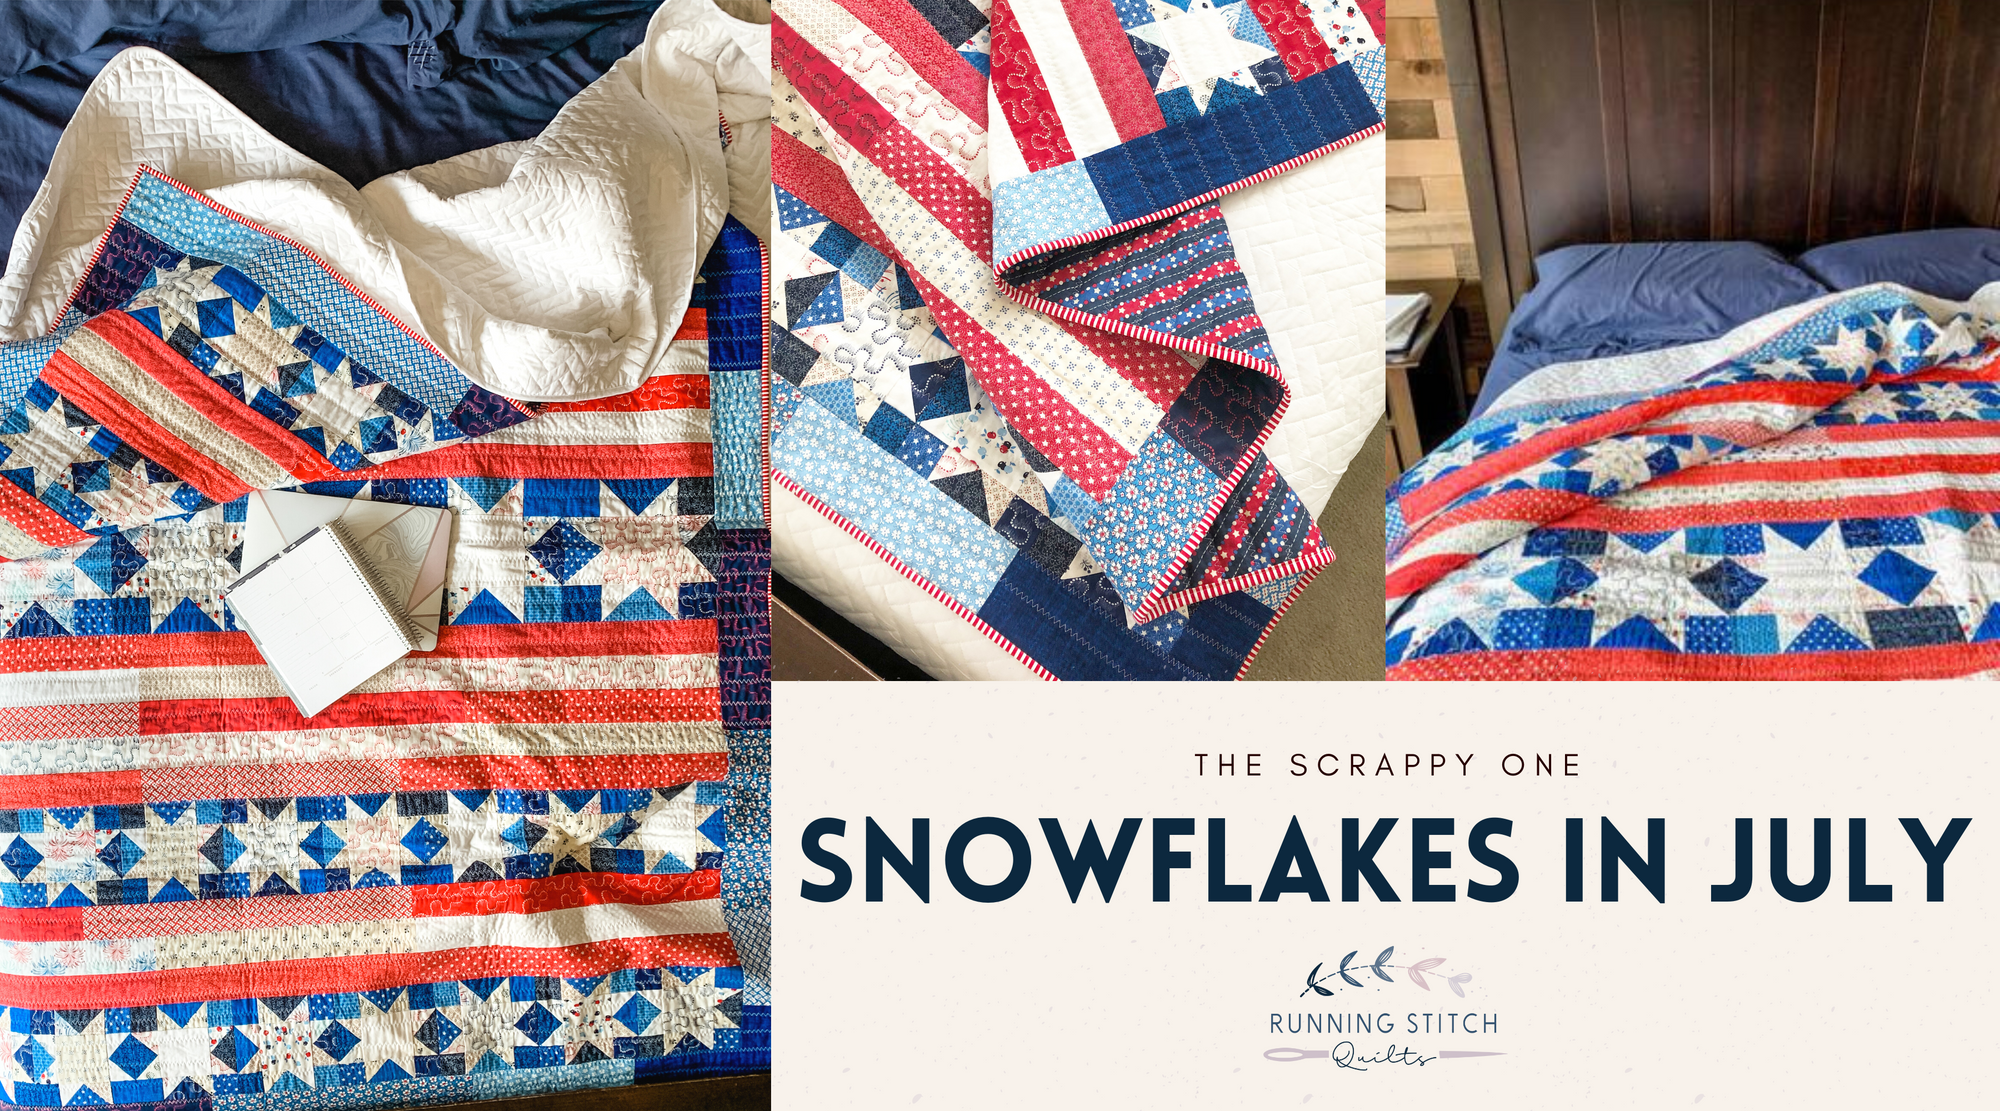 Snowflakes in July - The Scrappy One